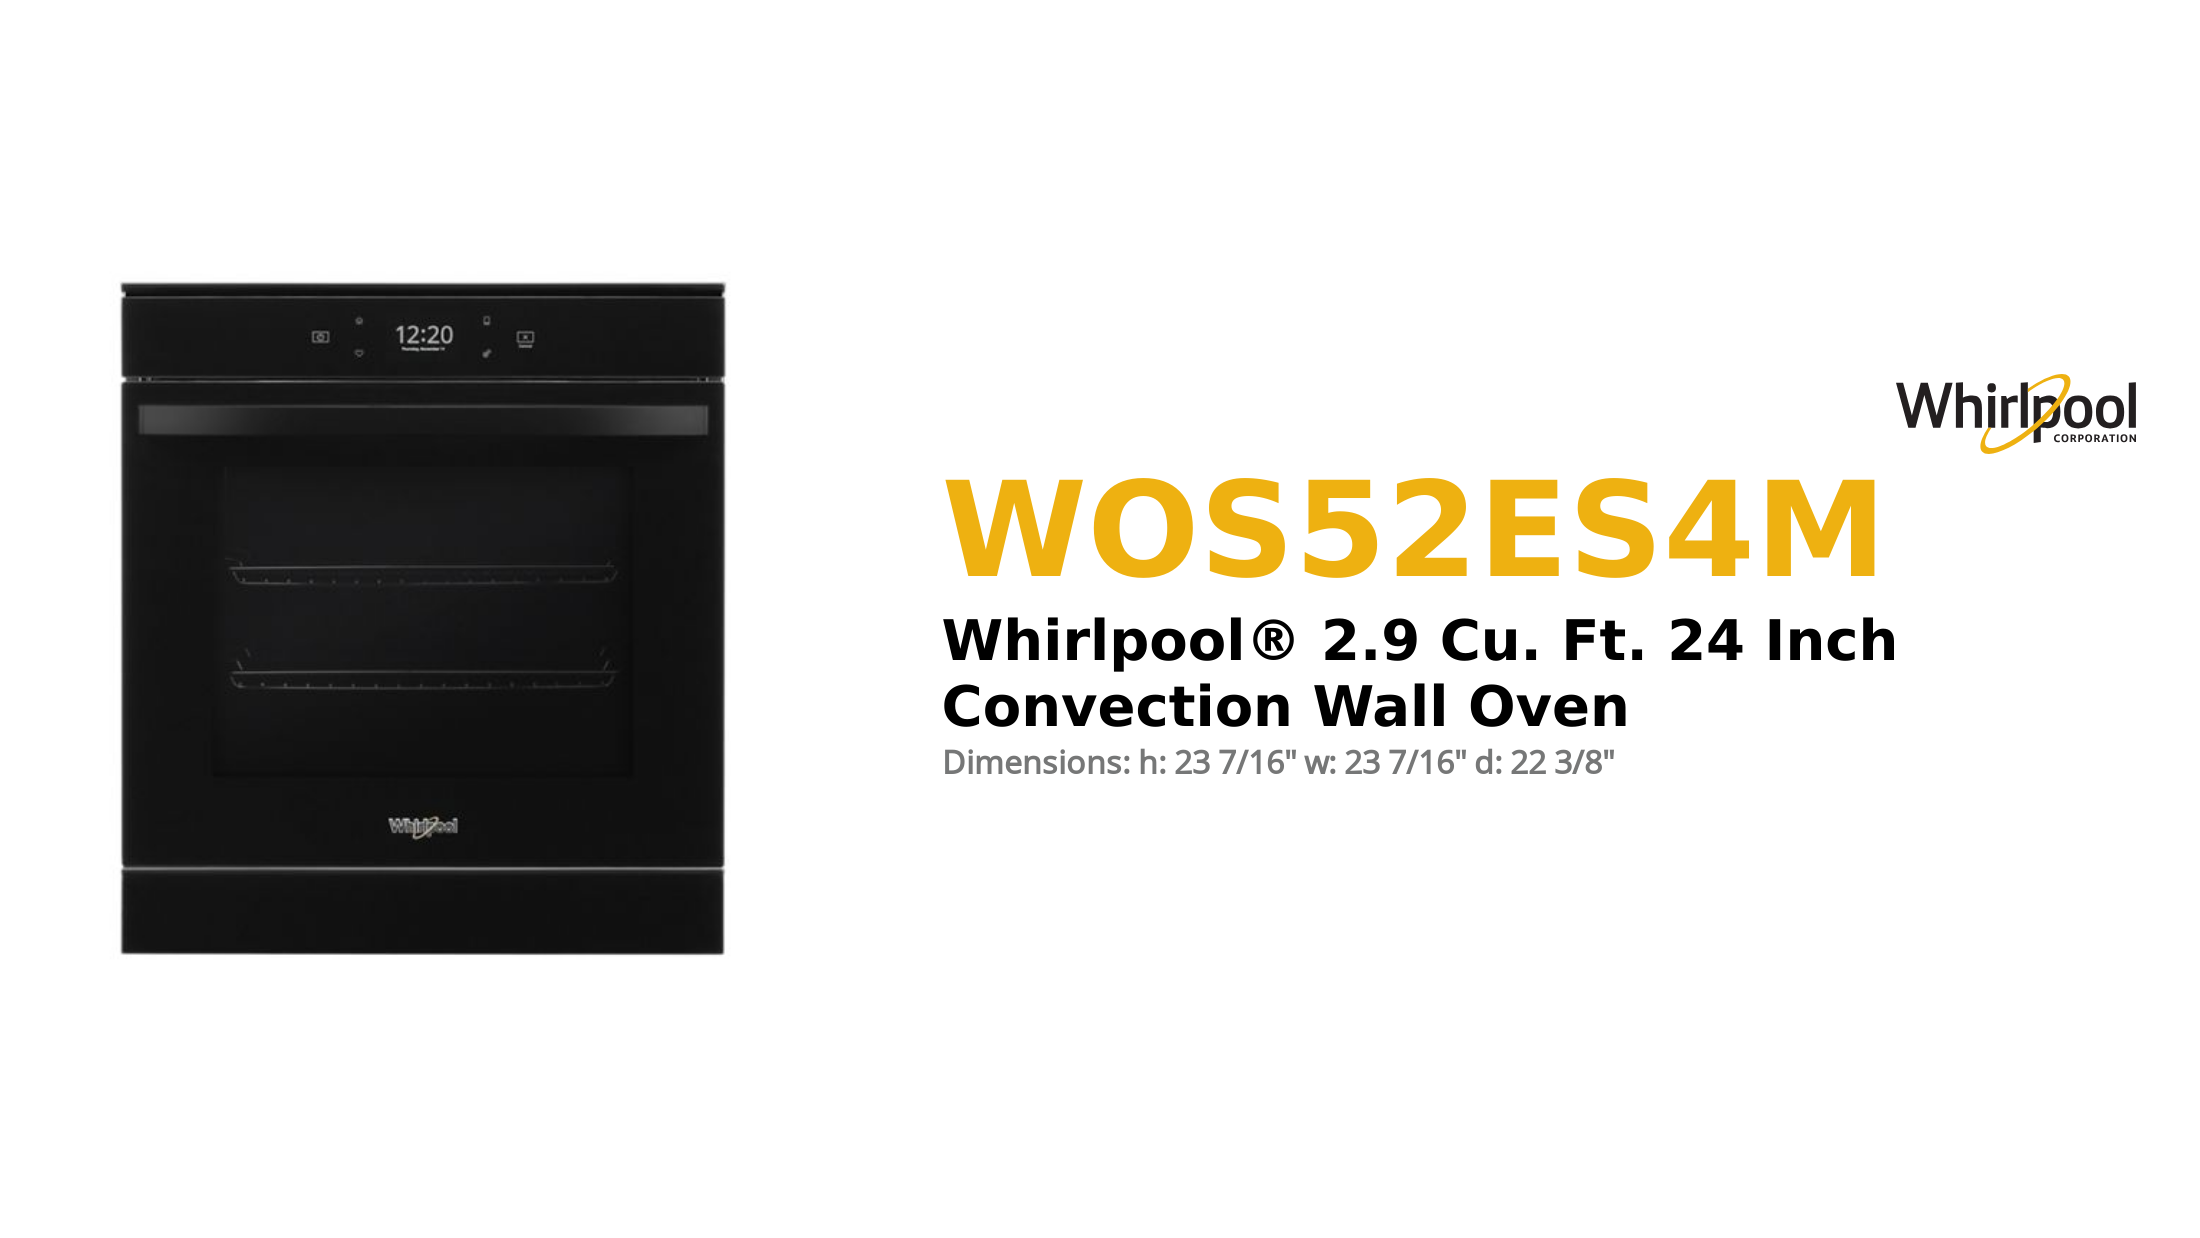 Whirlpool® 2.9 Cu. Ft. 24 Inch Convection Wall Oven